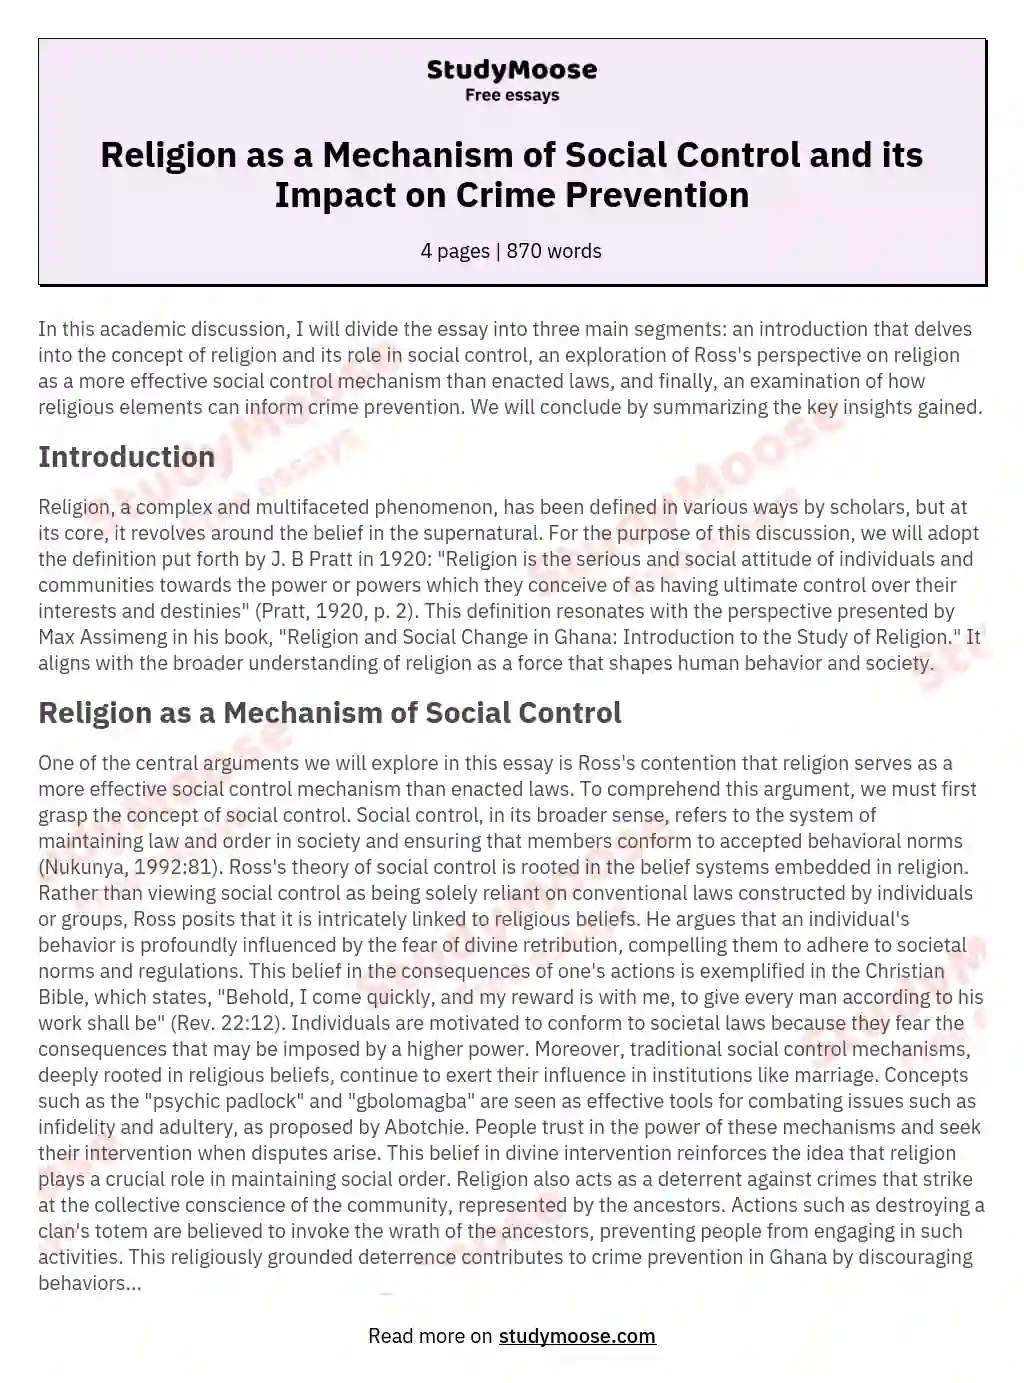 Religion as a Mechanism of Social Control and its Impact on Crime Prevention essay